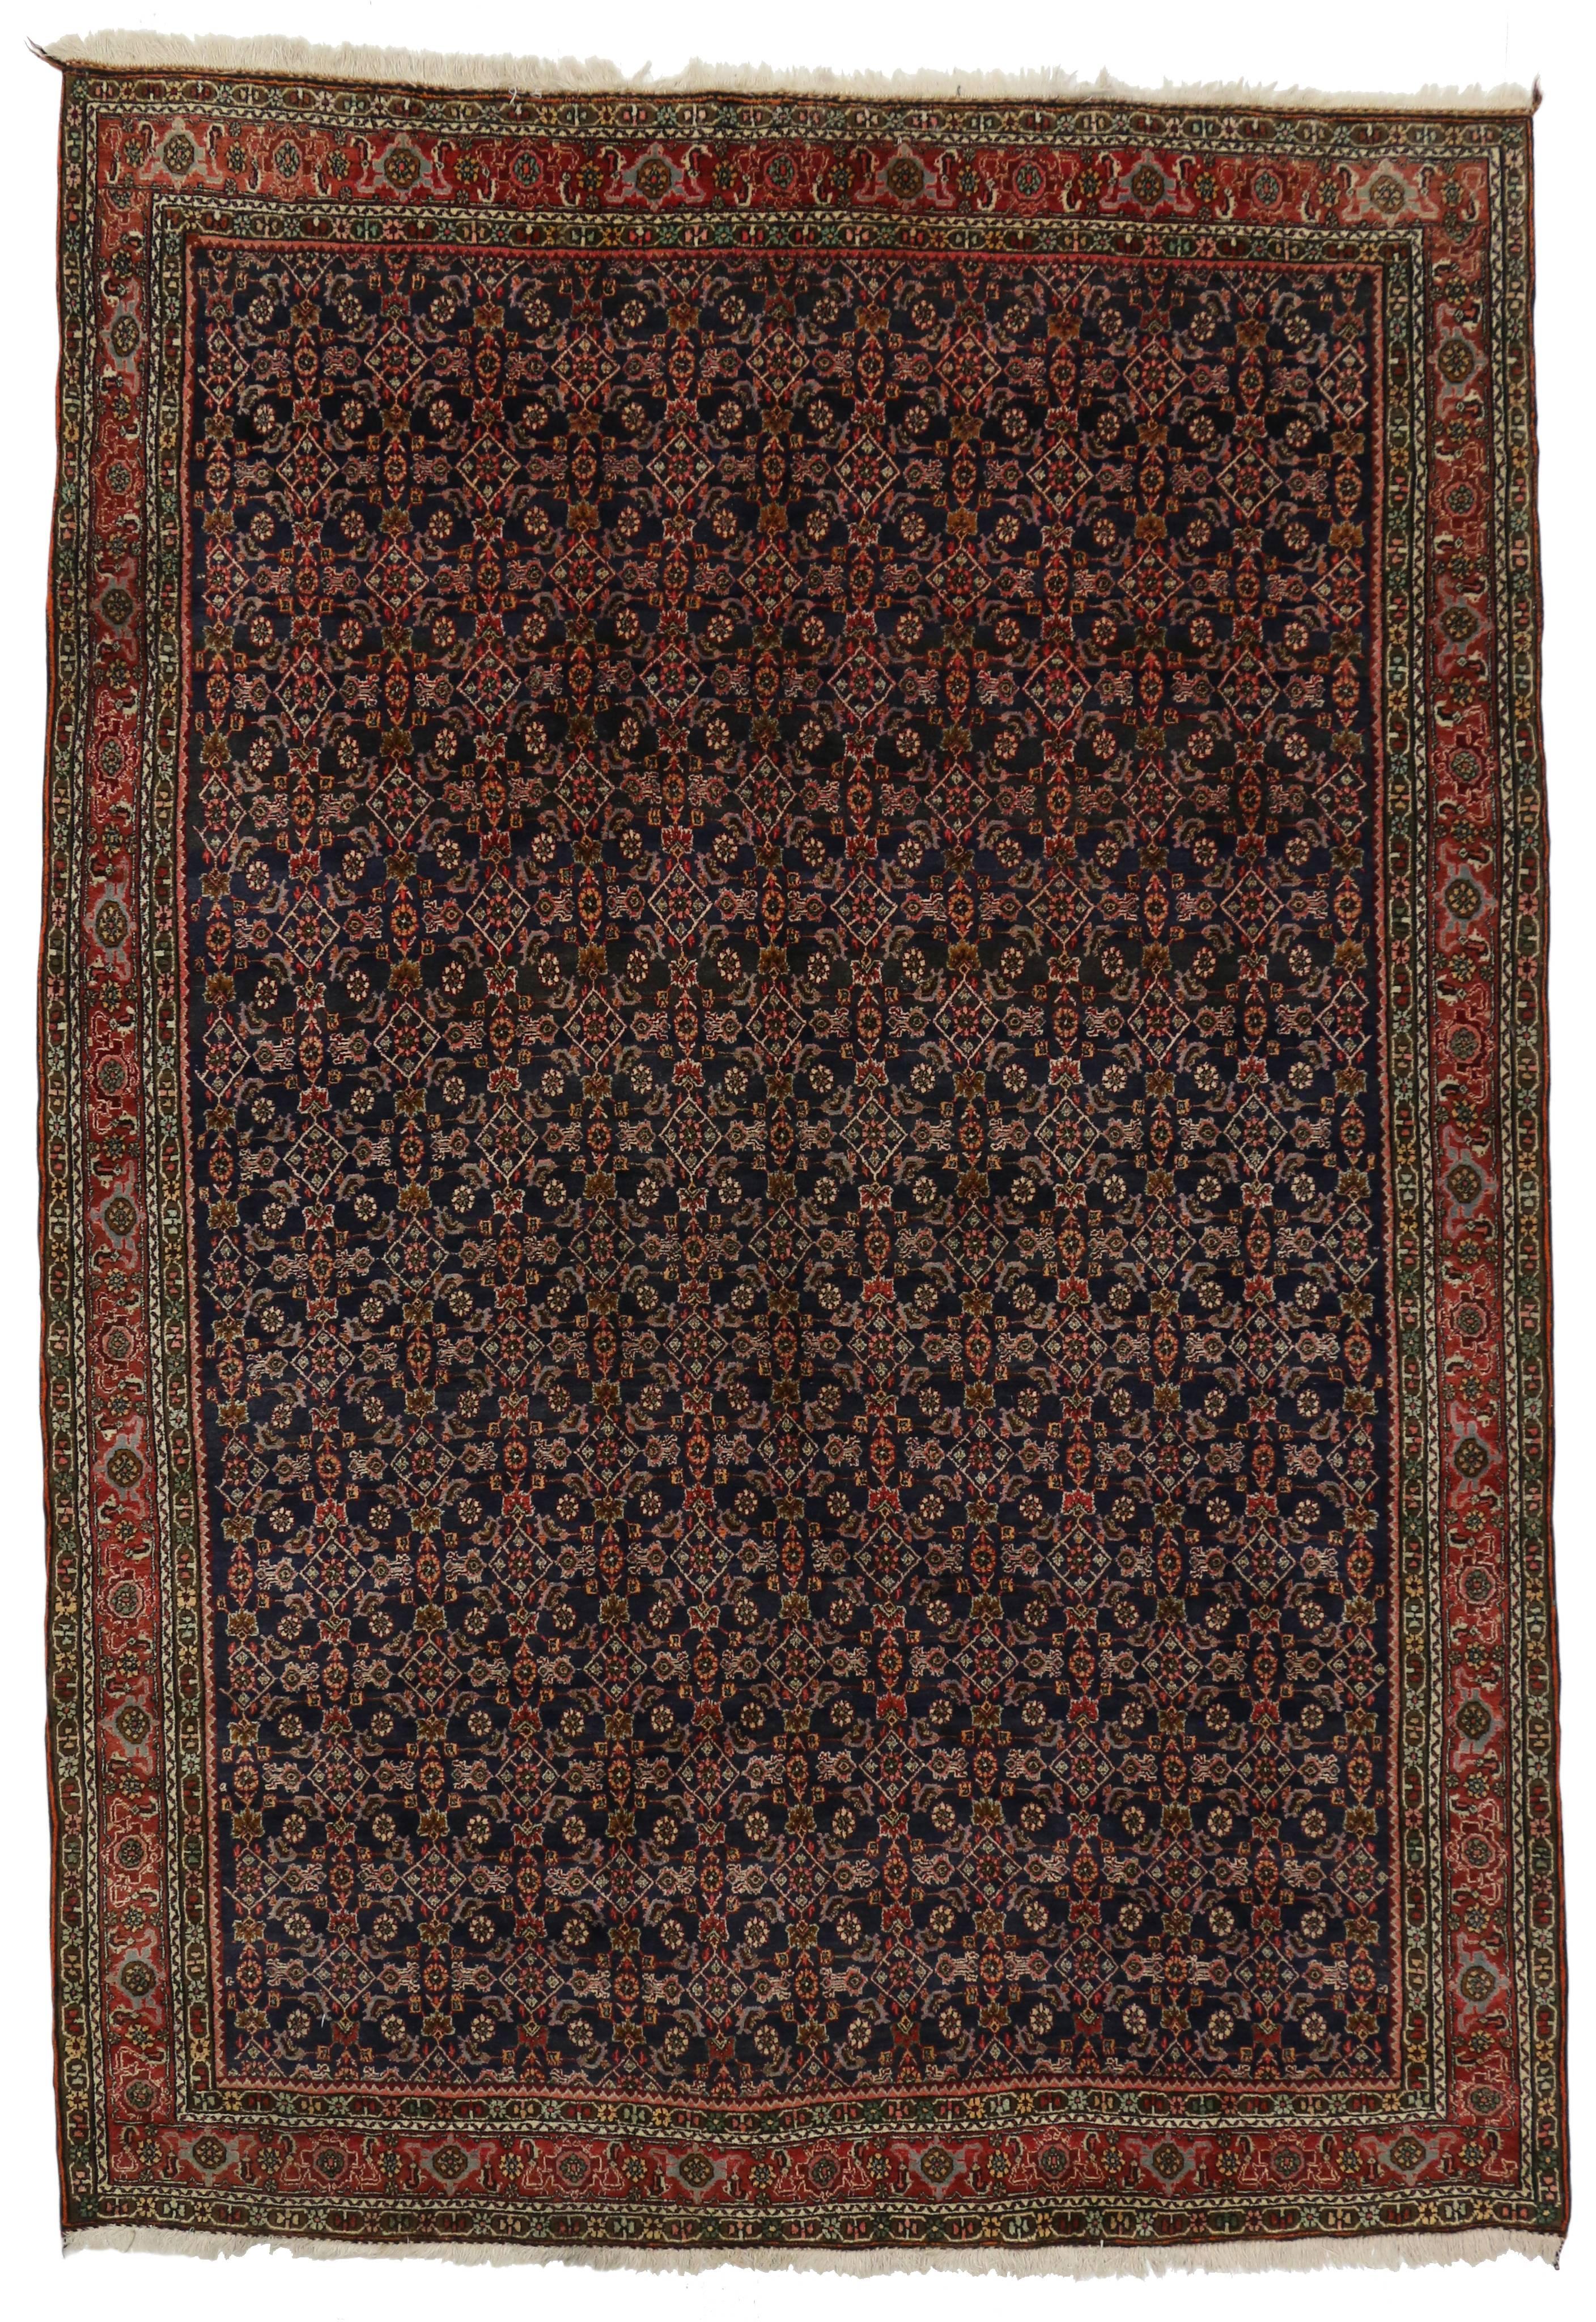 Wool Antique Bijar Persian Rug with Modern Traditional Style, the Iron Rugs of Persia